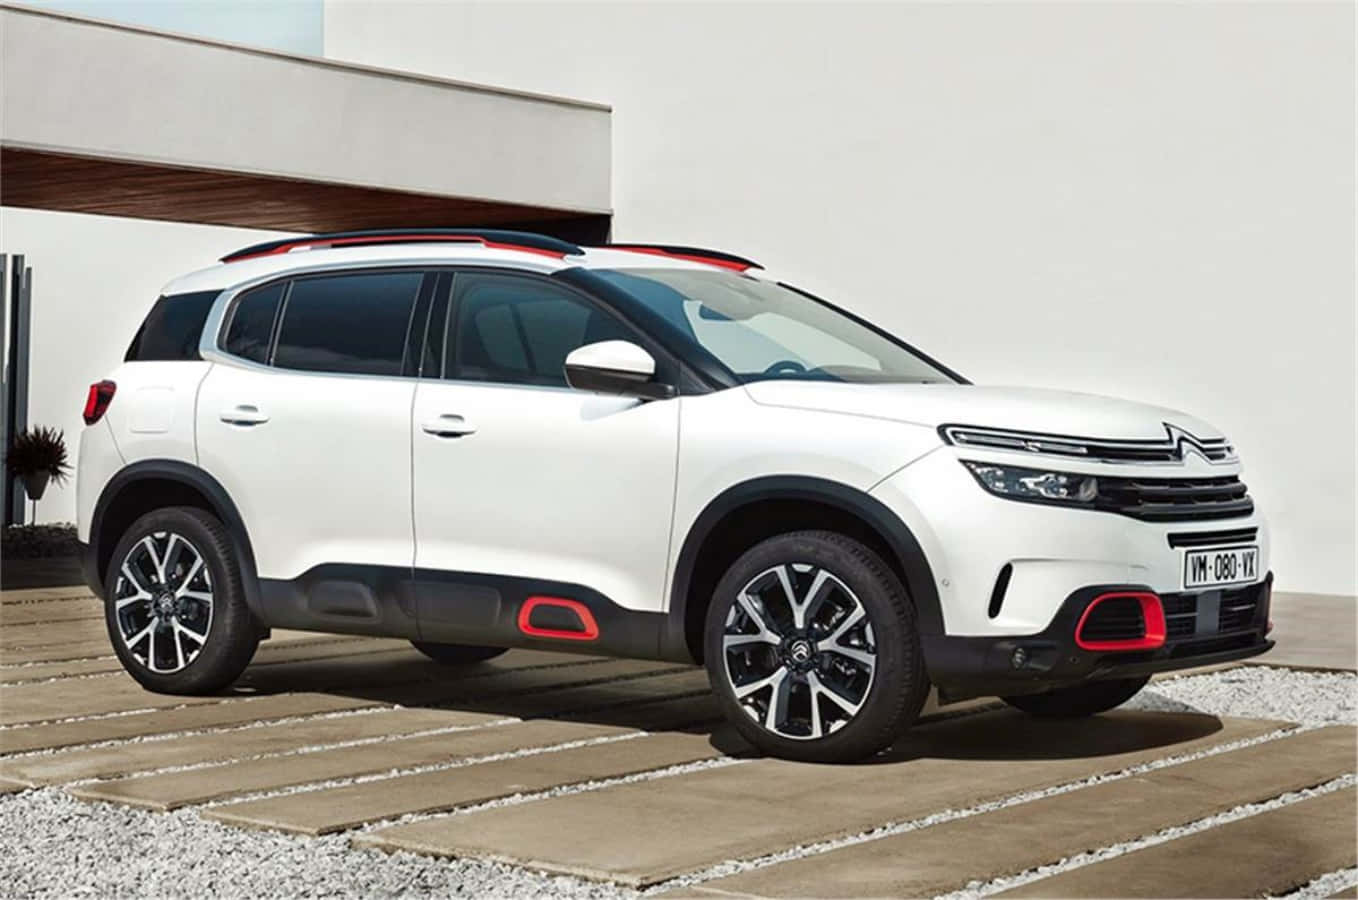 Citroen C5 Aircross SUV - It's time to elevate your drive